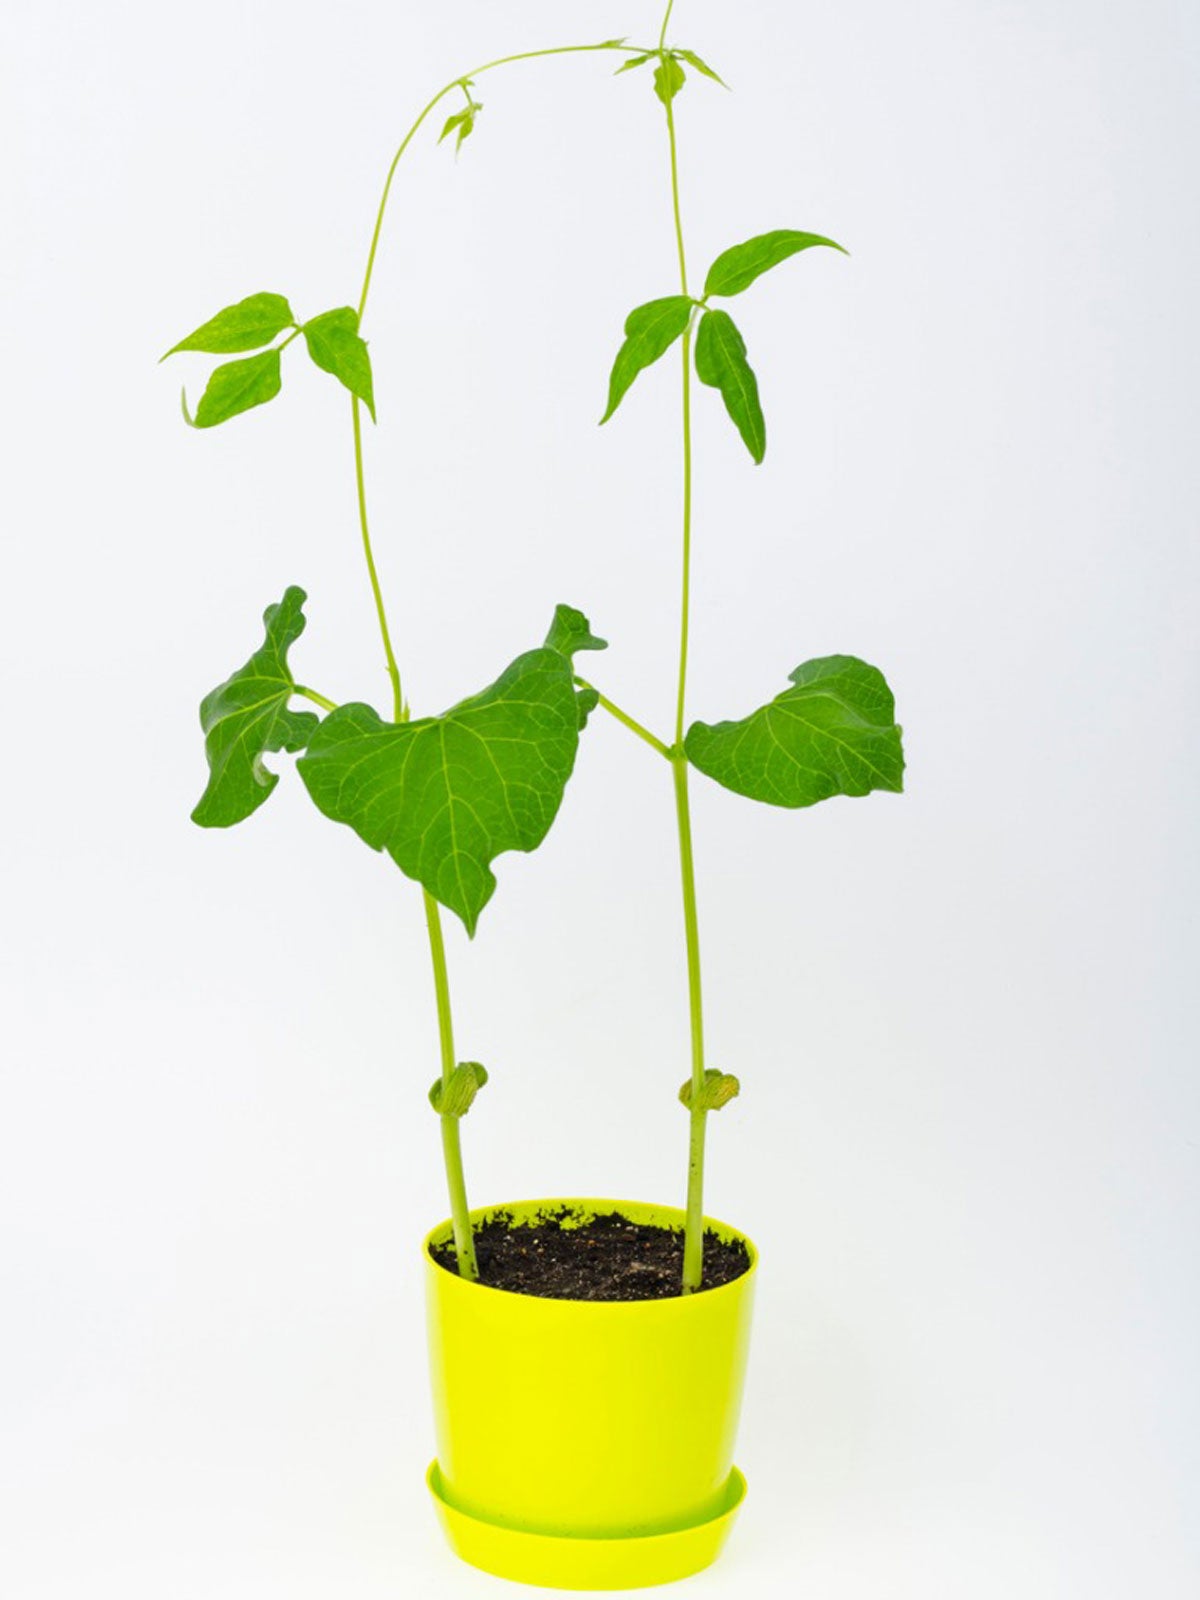 Growing Beans In Containers How To Care For Potted Bean Plants